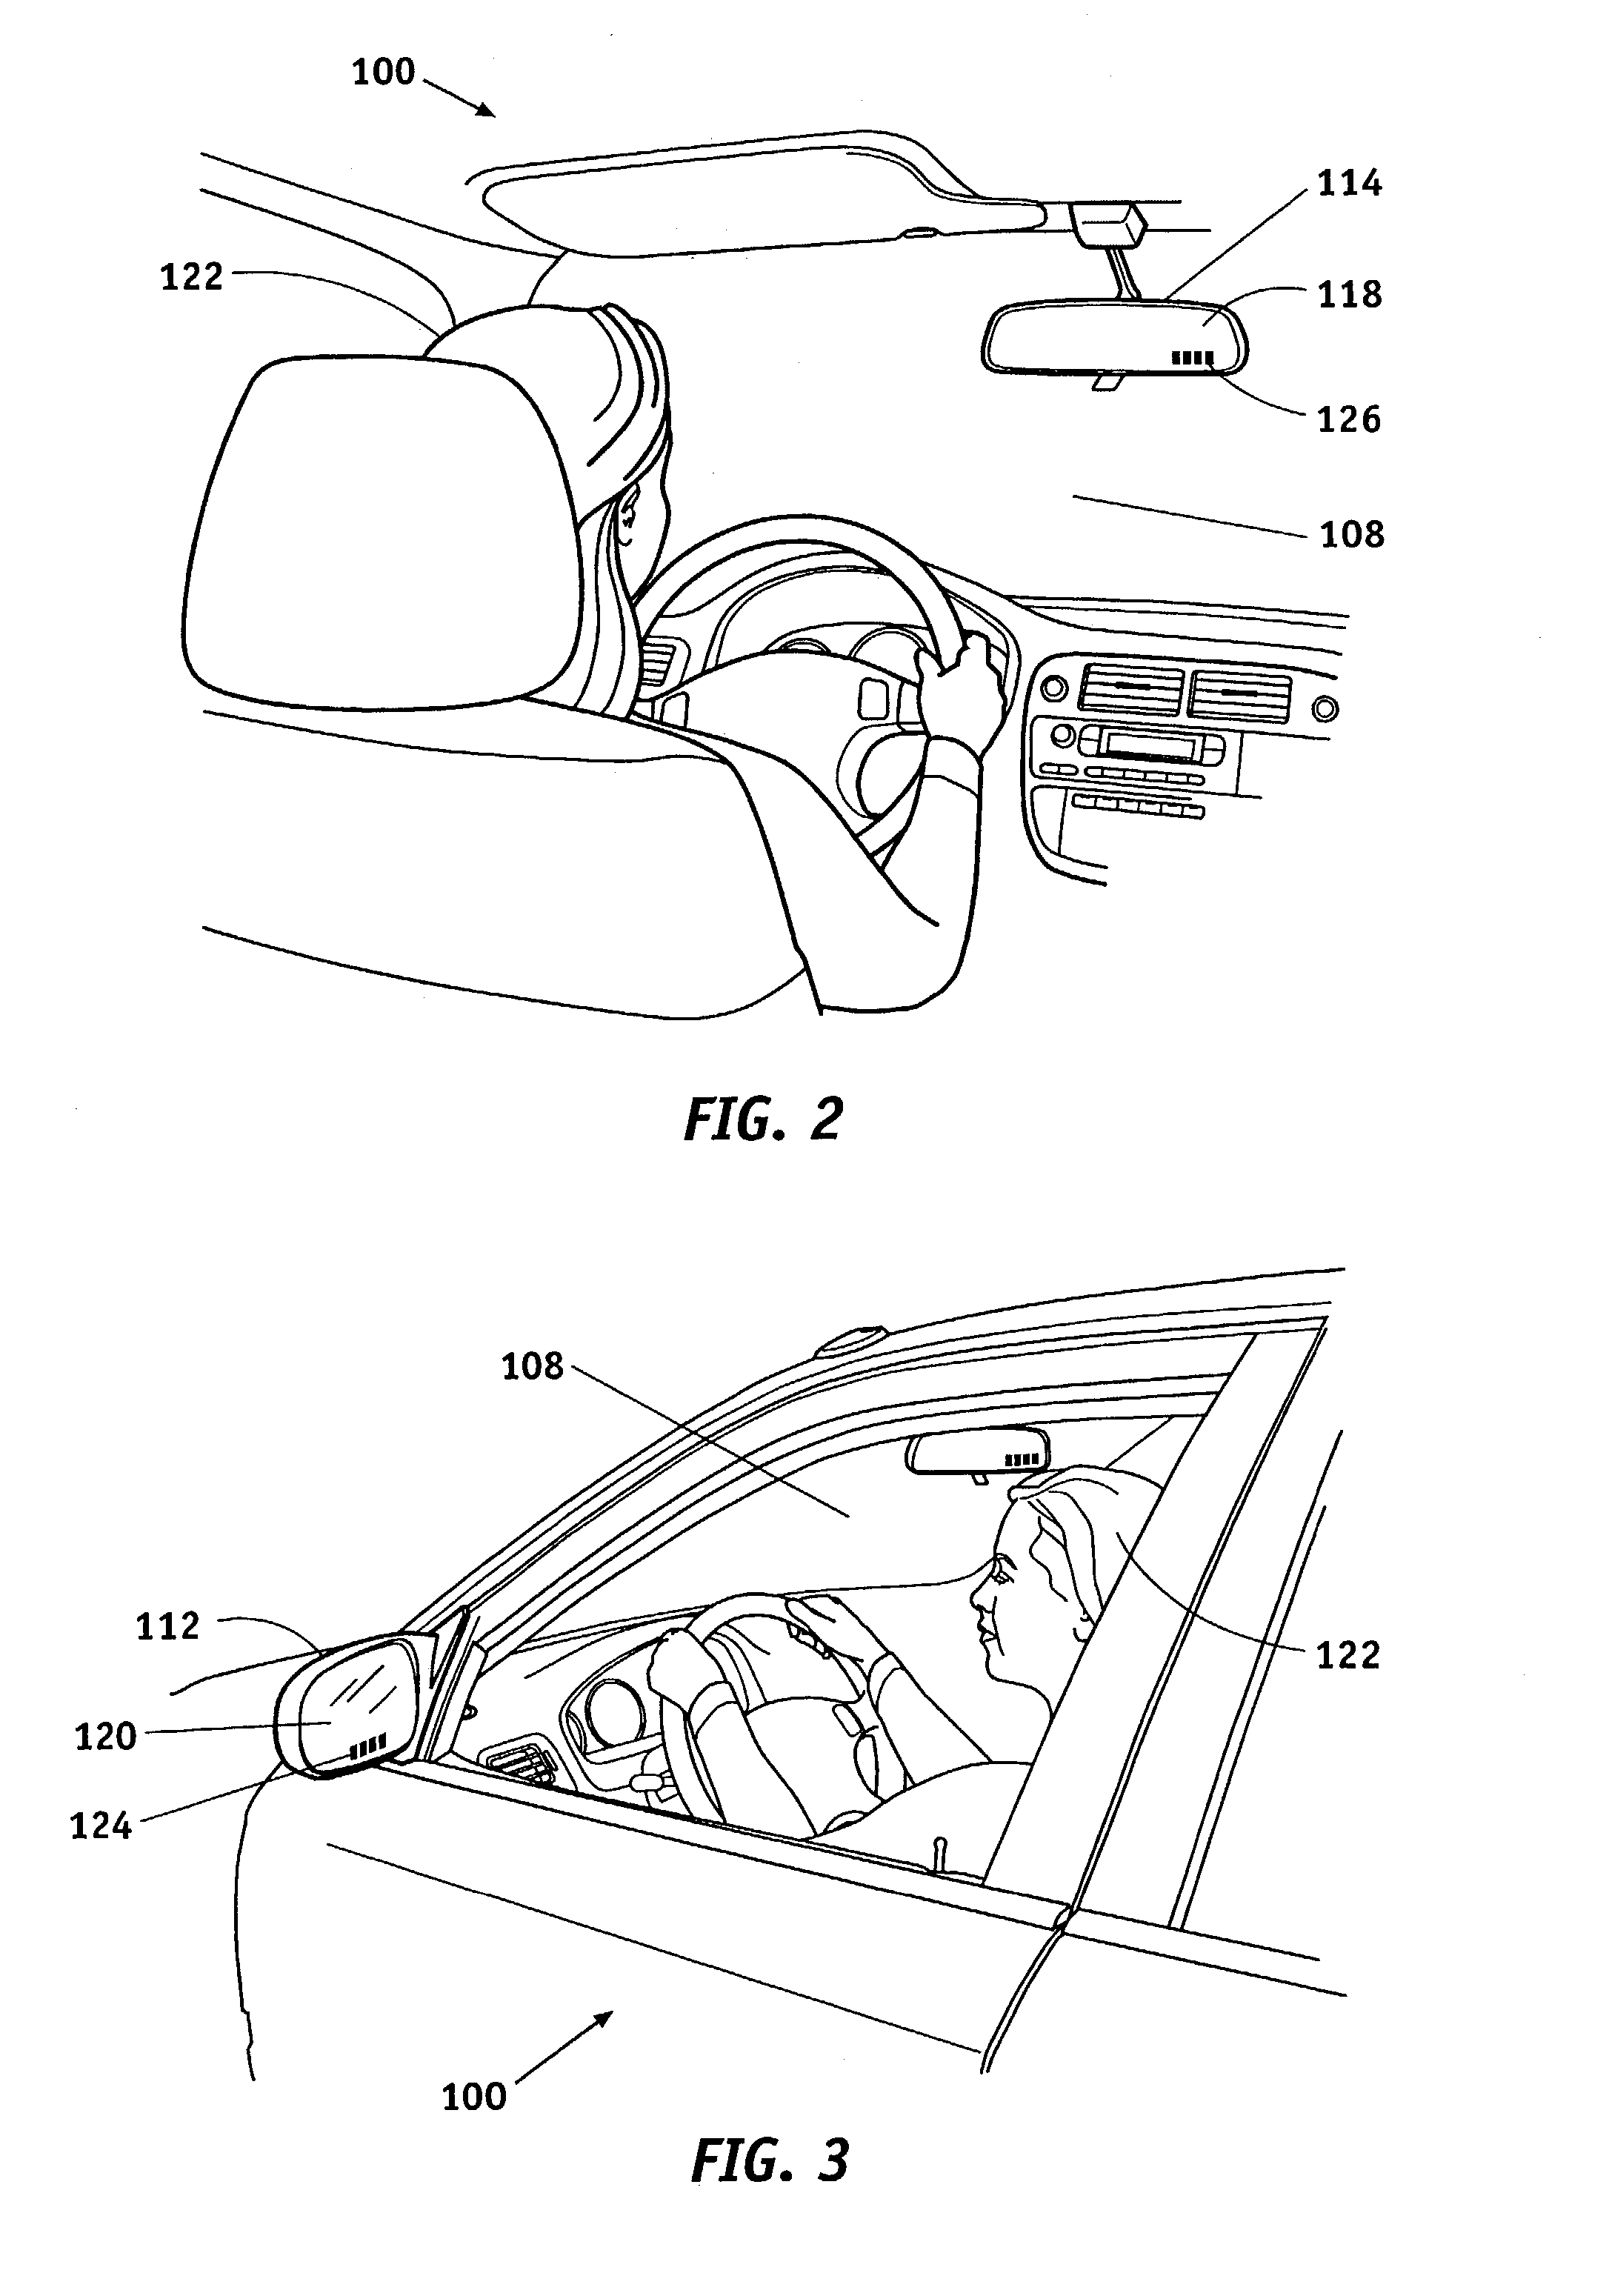 Distance detection and display system for use in a vehicle